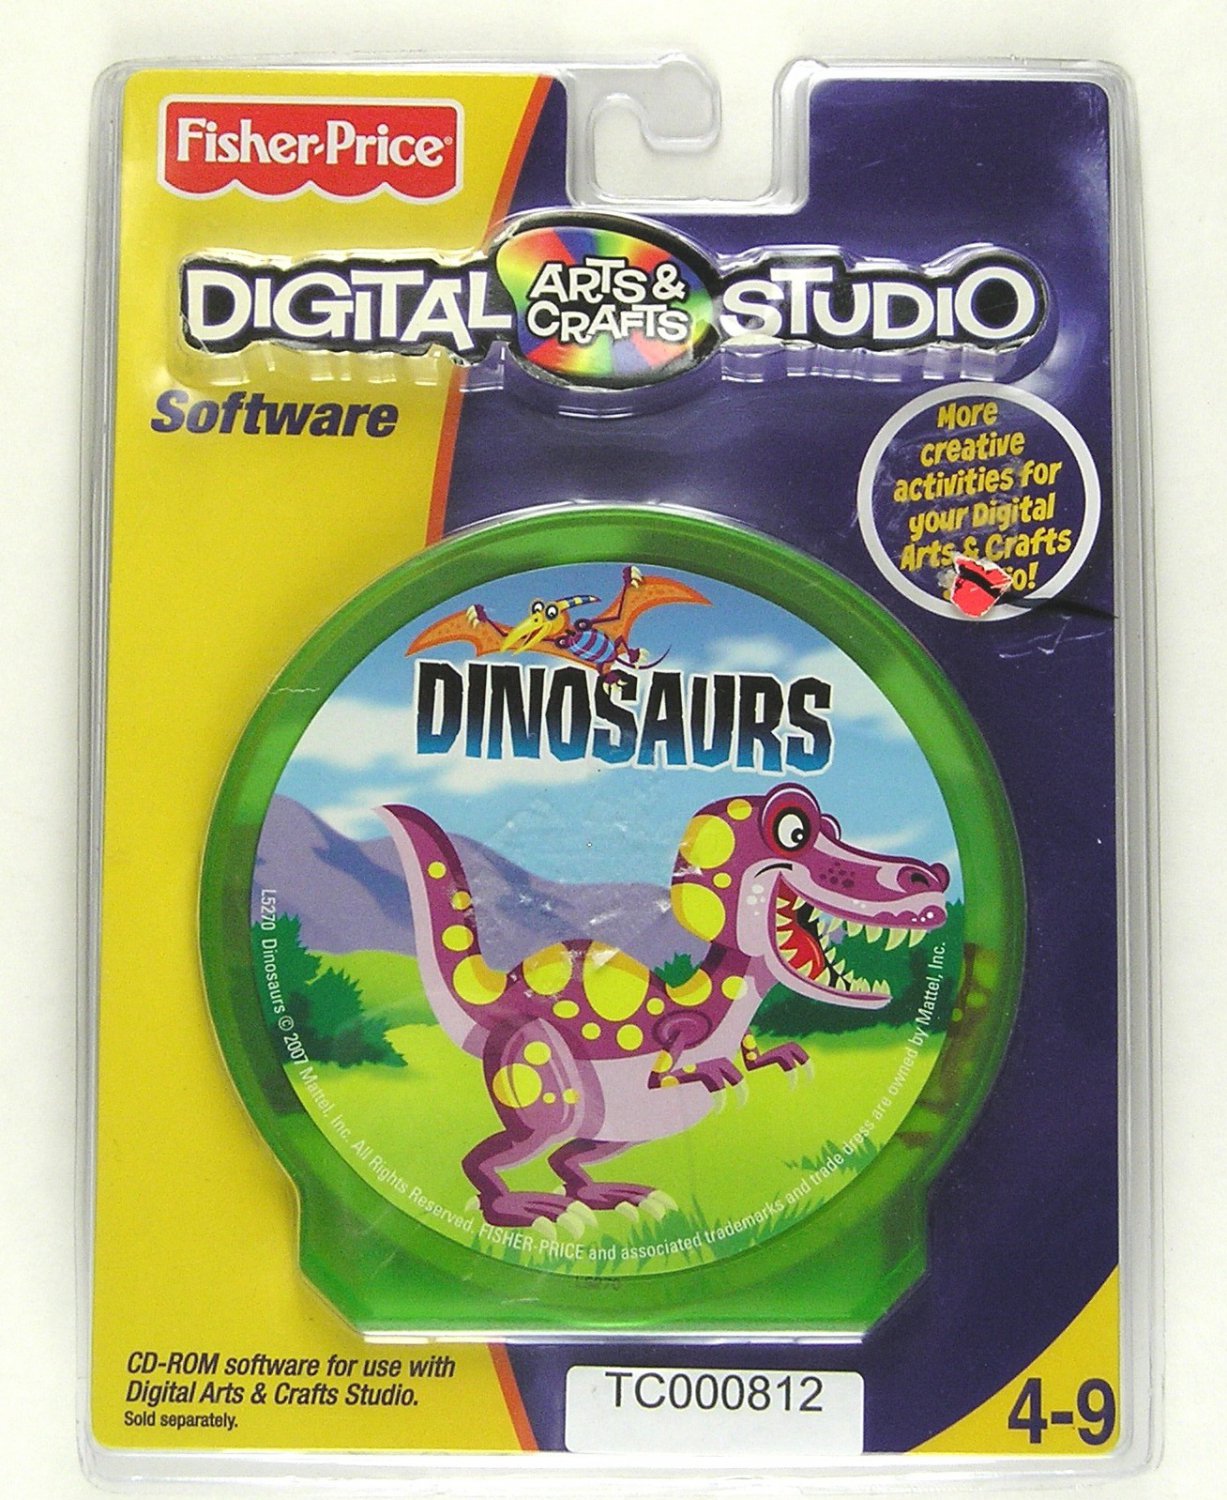 Fisher Price Digital Arts And Crafts Studio Dinosaurs Software For